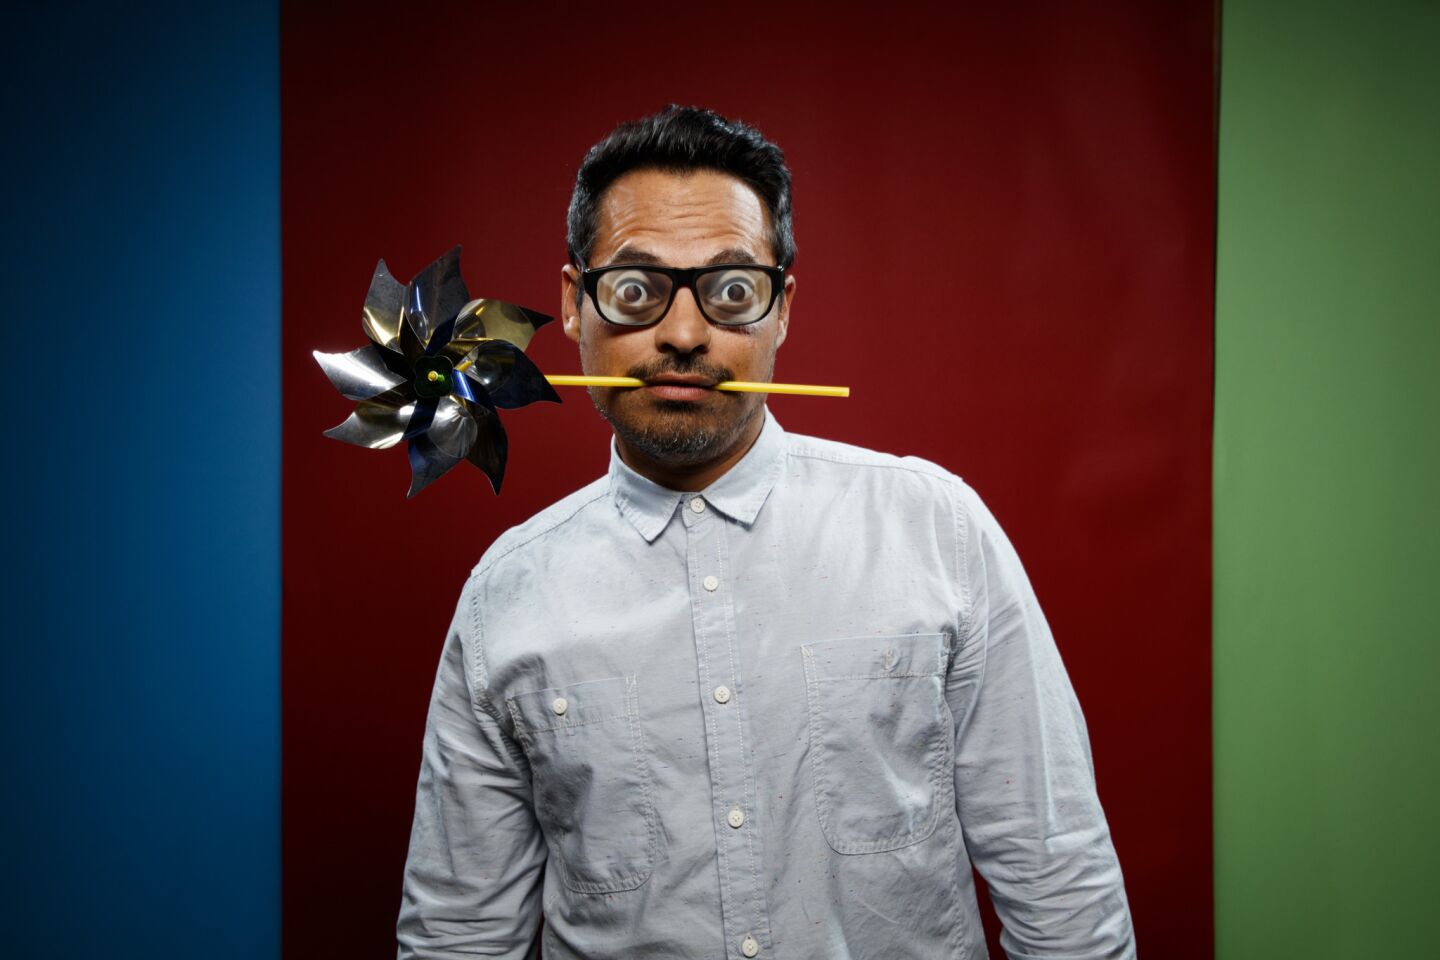 Michael Pena, from "The Lego Ninjago Movie," photographed in the L.A. Times photo studio at Comic-Con 2017.